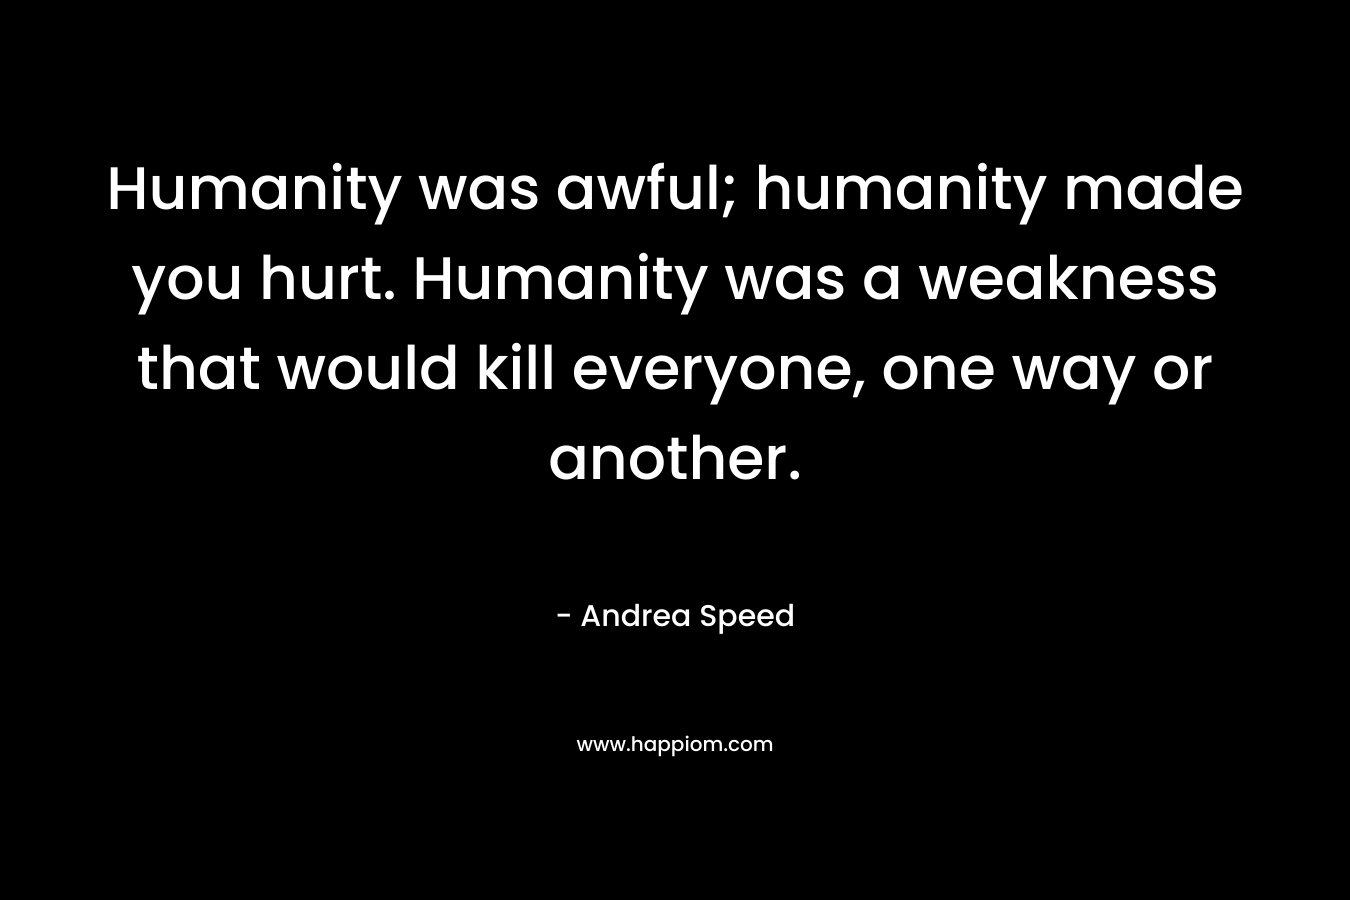 Humanity was awful; humanity made you hurt. Humanity was a weakness that would kill everyone, one way or another.